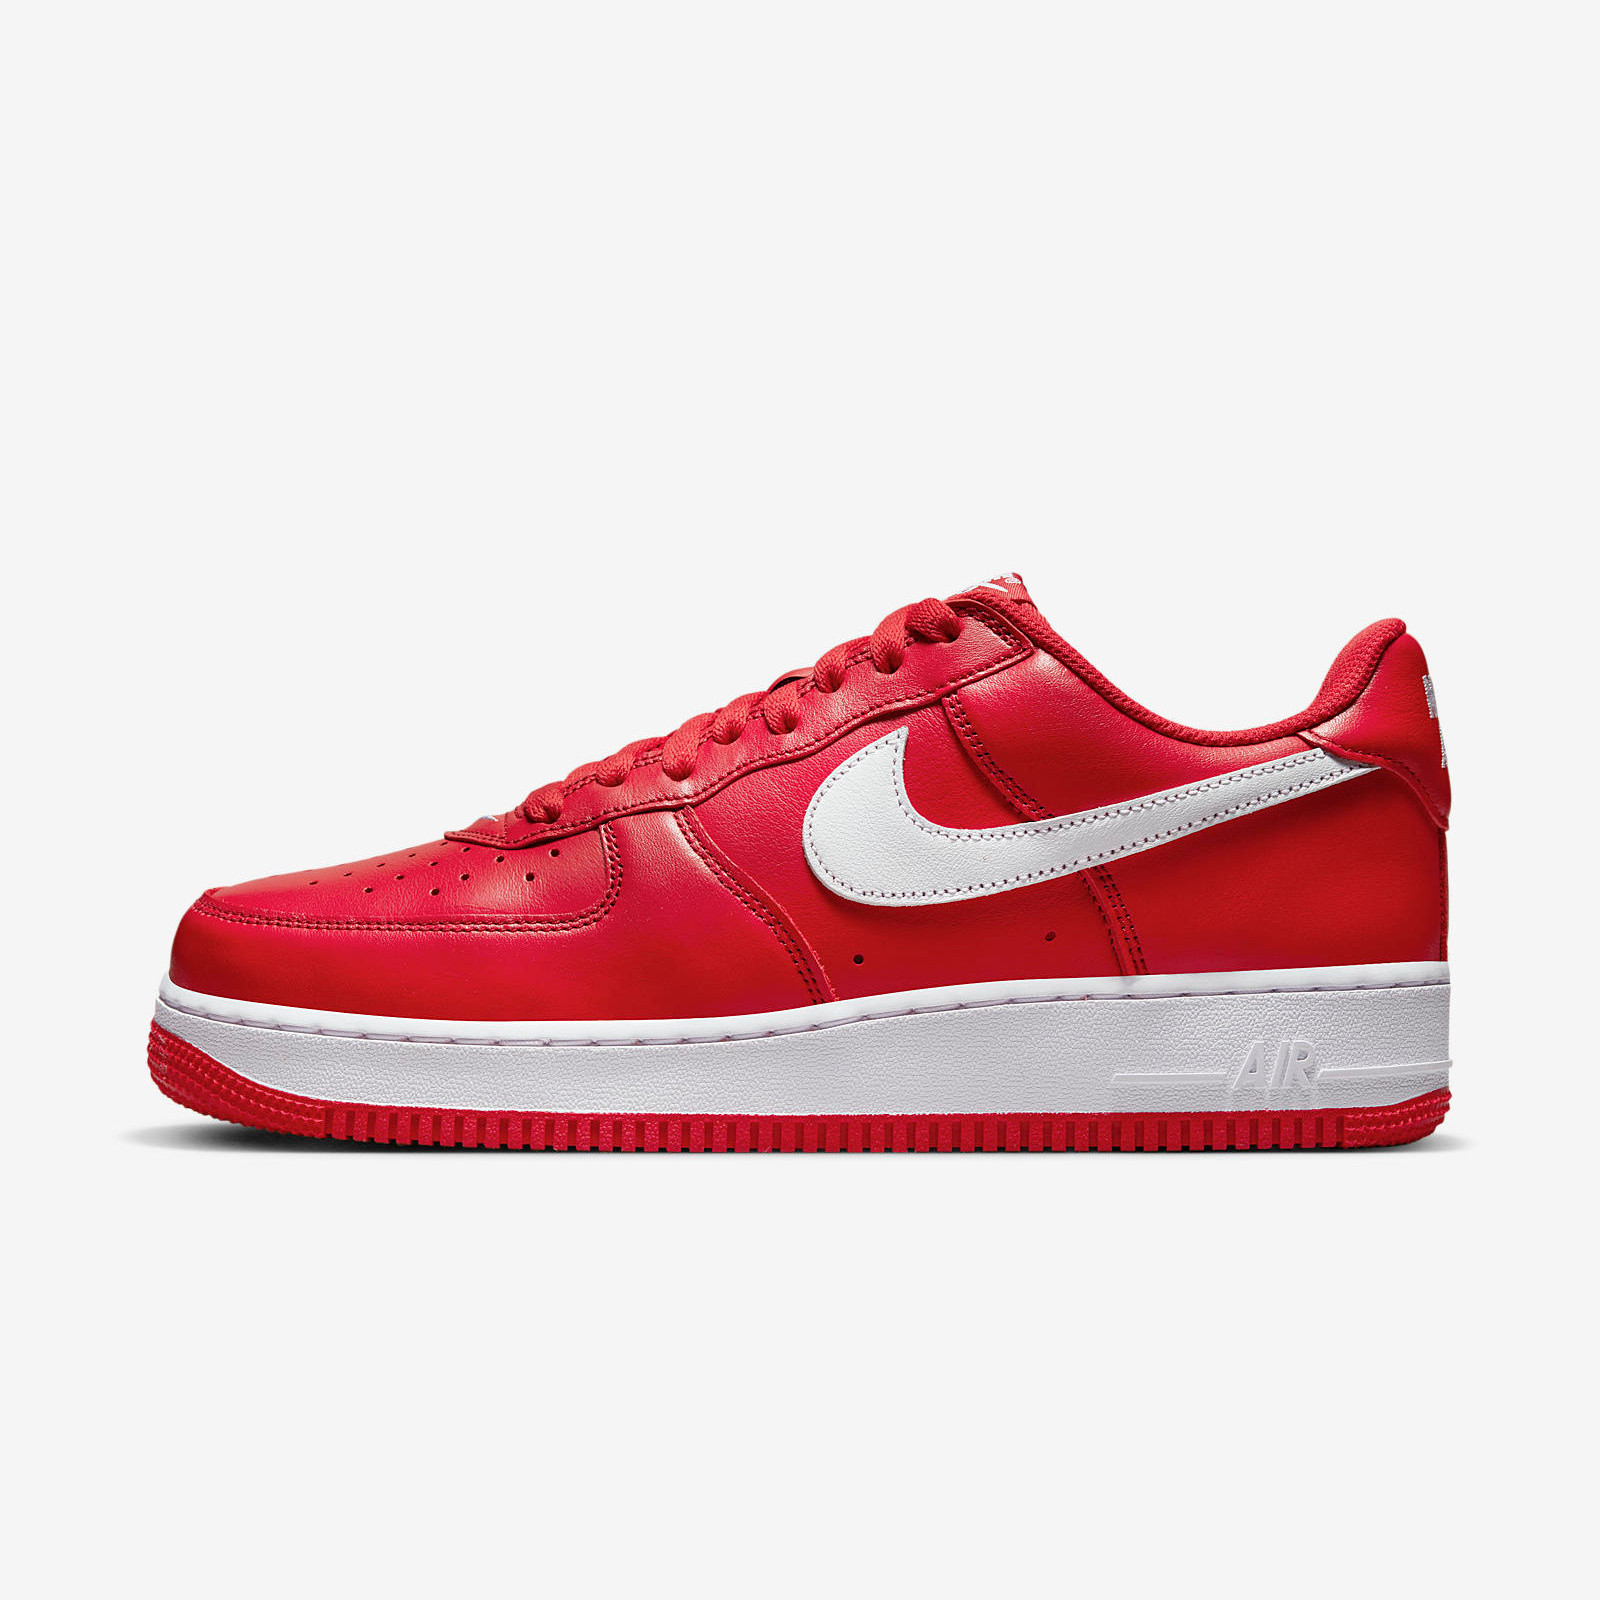 Nike Air Force 1
« University Red »